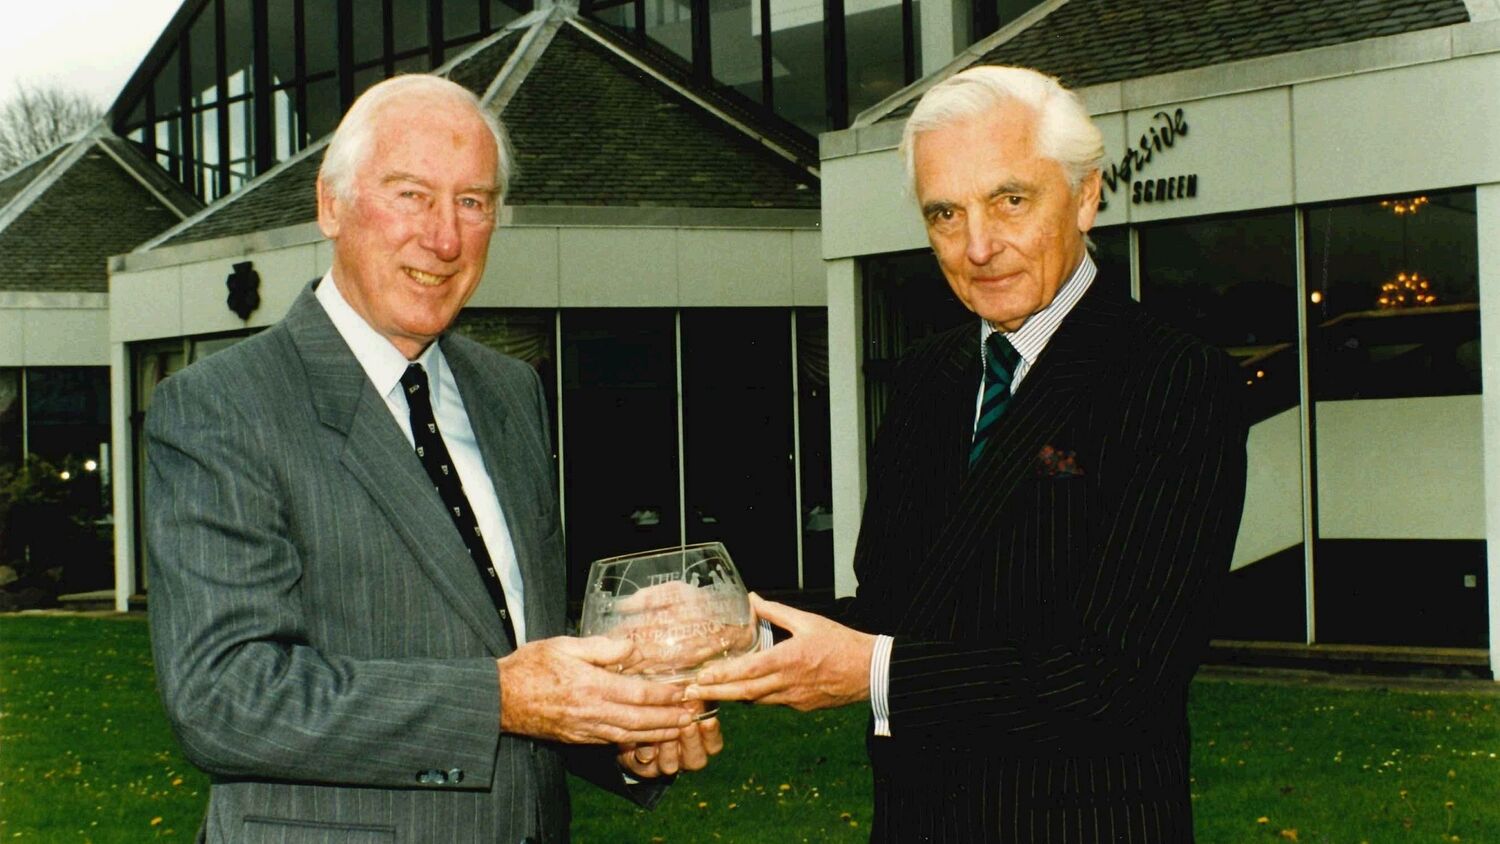 Two older men stand outside a modern building, holding an engraved glass trophy between them.